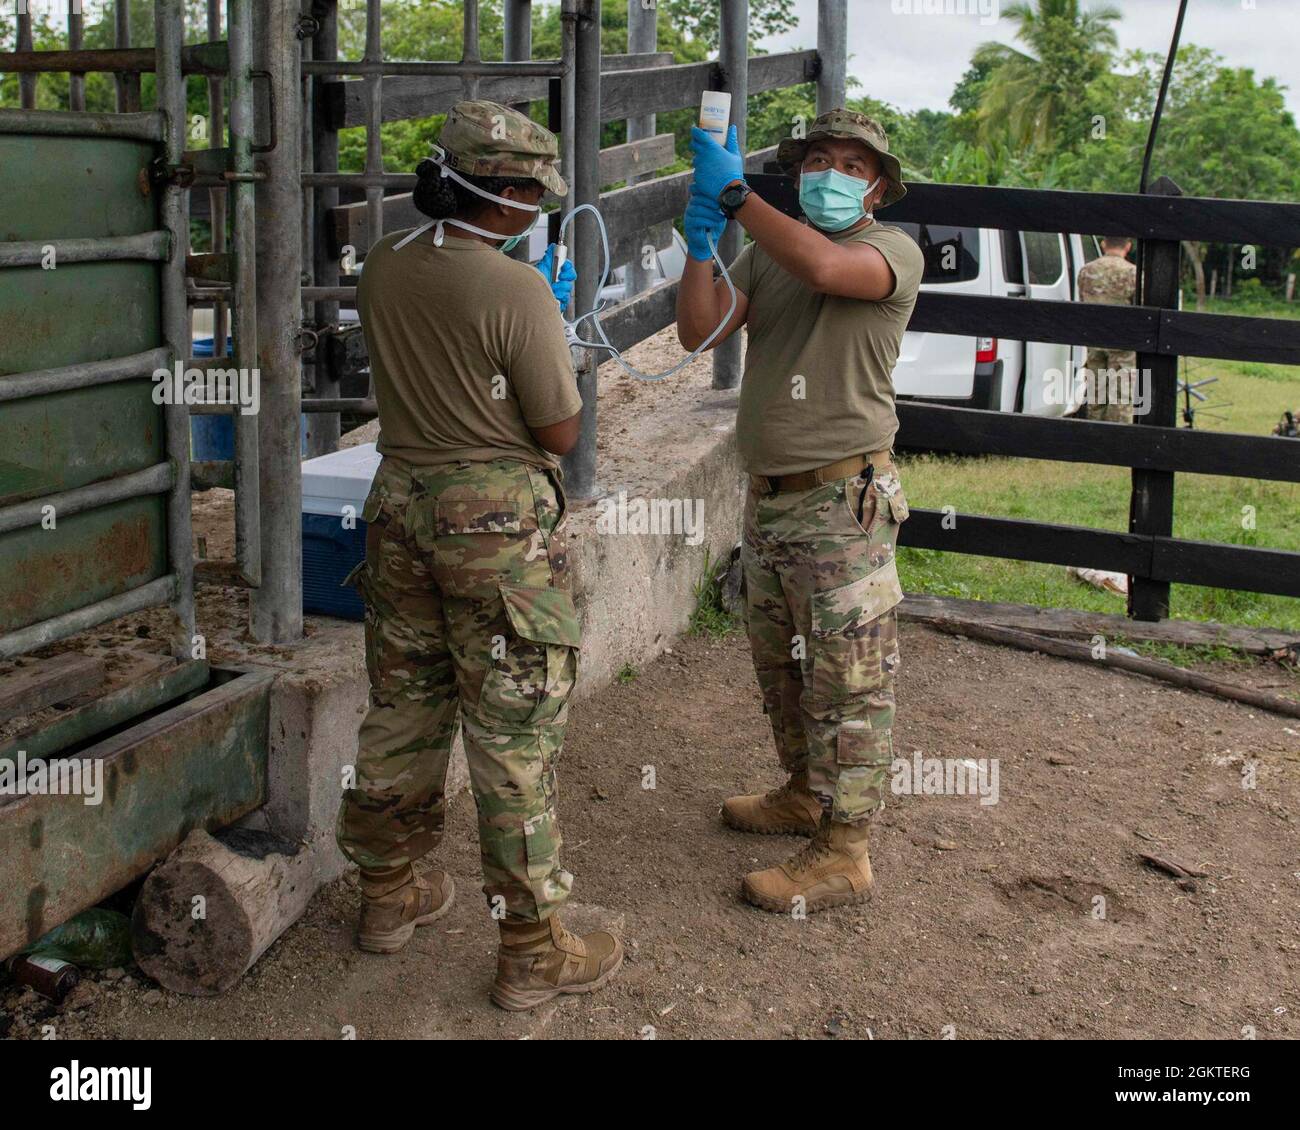 U.S. Army Capt. Shanell Thomas, a veterinarian and U.S. Army Staff Sgt. Rene Aventura, a field veterinary service technician, both with the 109th Medical Detachment Veterinary Services out of Garden Grove, Calif., prepare vaccines for cattle during Resolute Sentinel 21 in Melchor De Mencos, Guatemala, June 29, 2021. RS-21 is an exercise to train U.S. and partner nation military engineers, veterinary personnel and medical professionals for humanitarian assistance and defense interoperability operations. Stock Photo